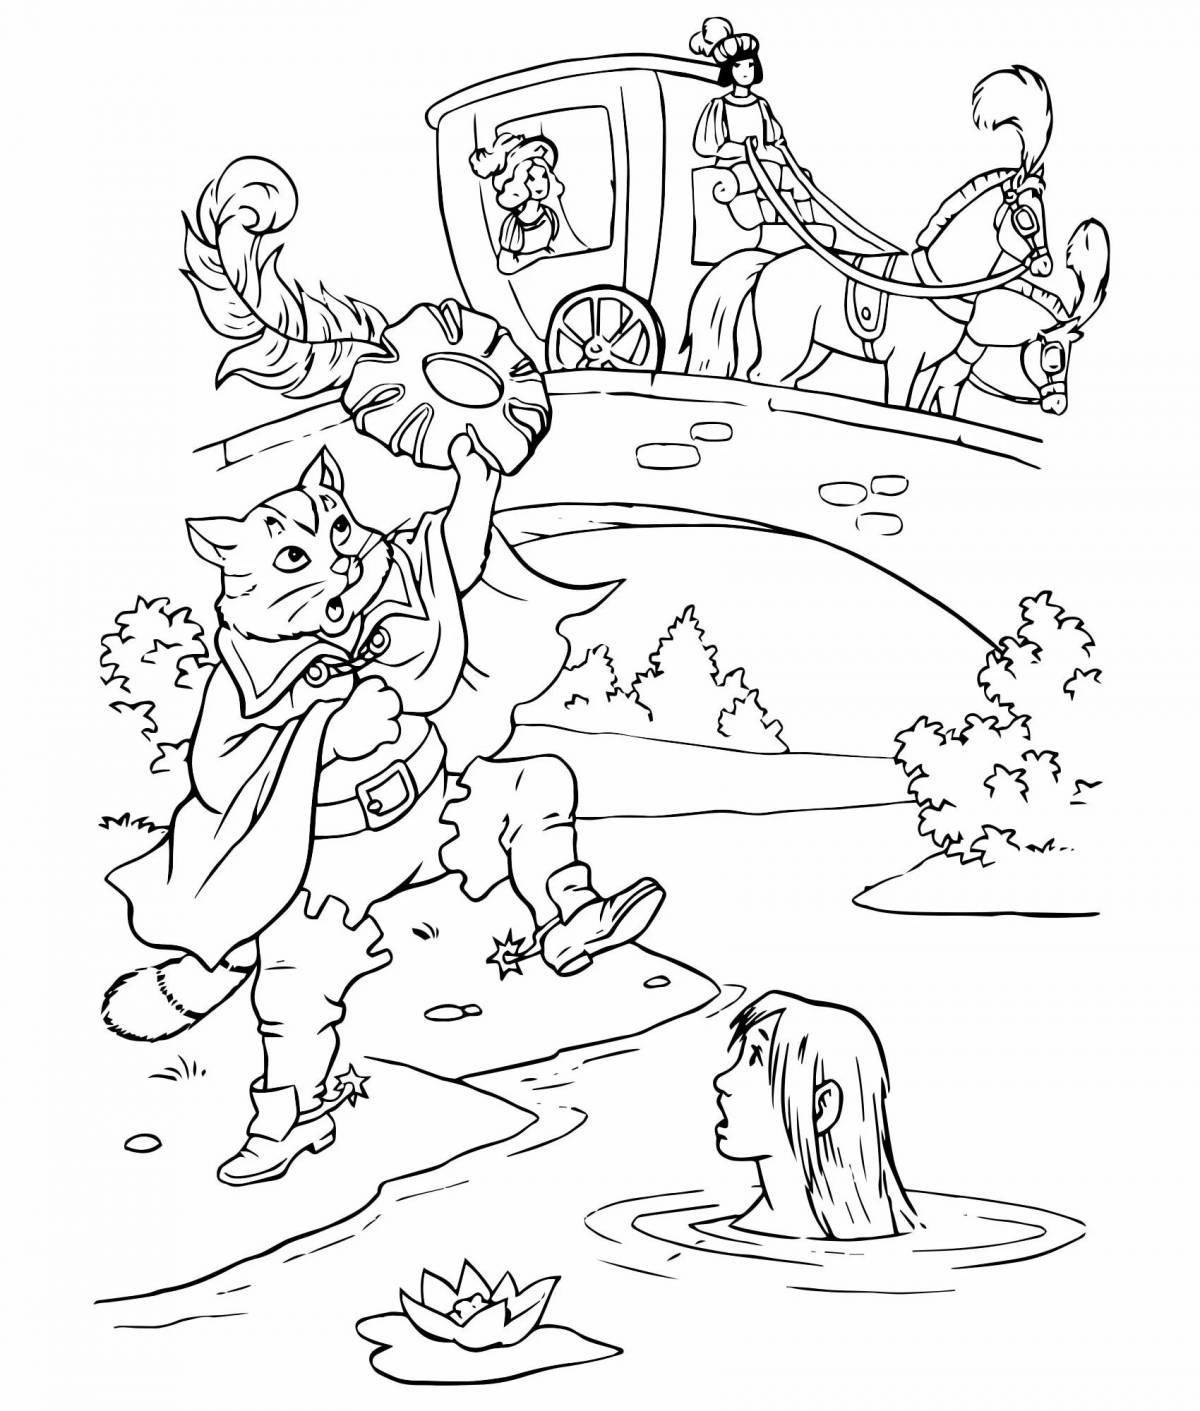 Charles Perrault's gorgeous Puss in Boots coloring book